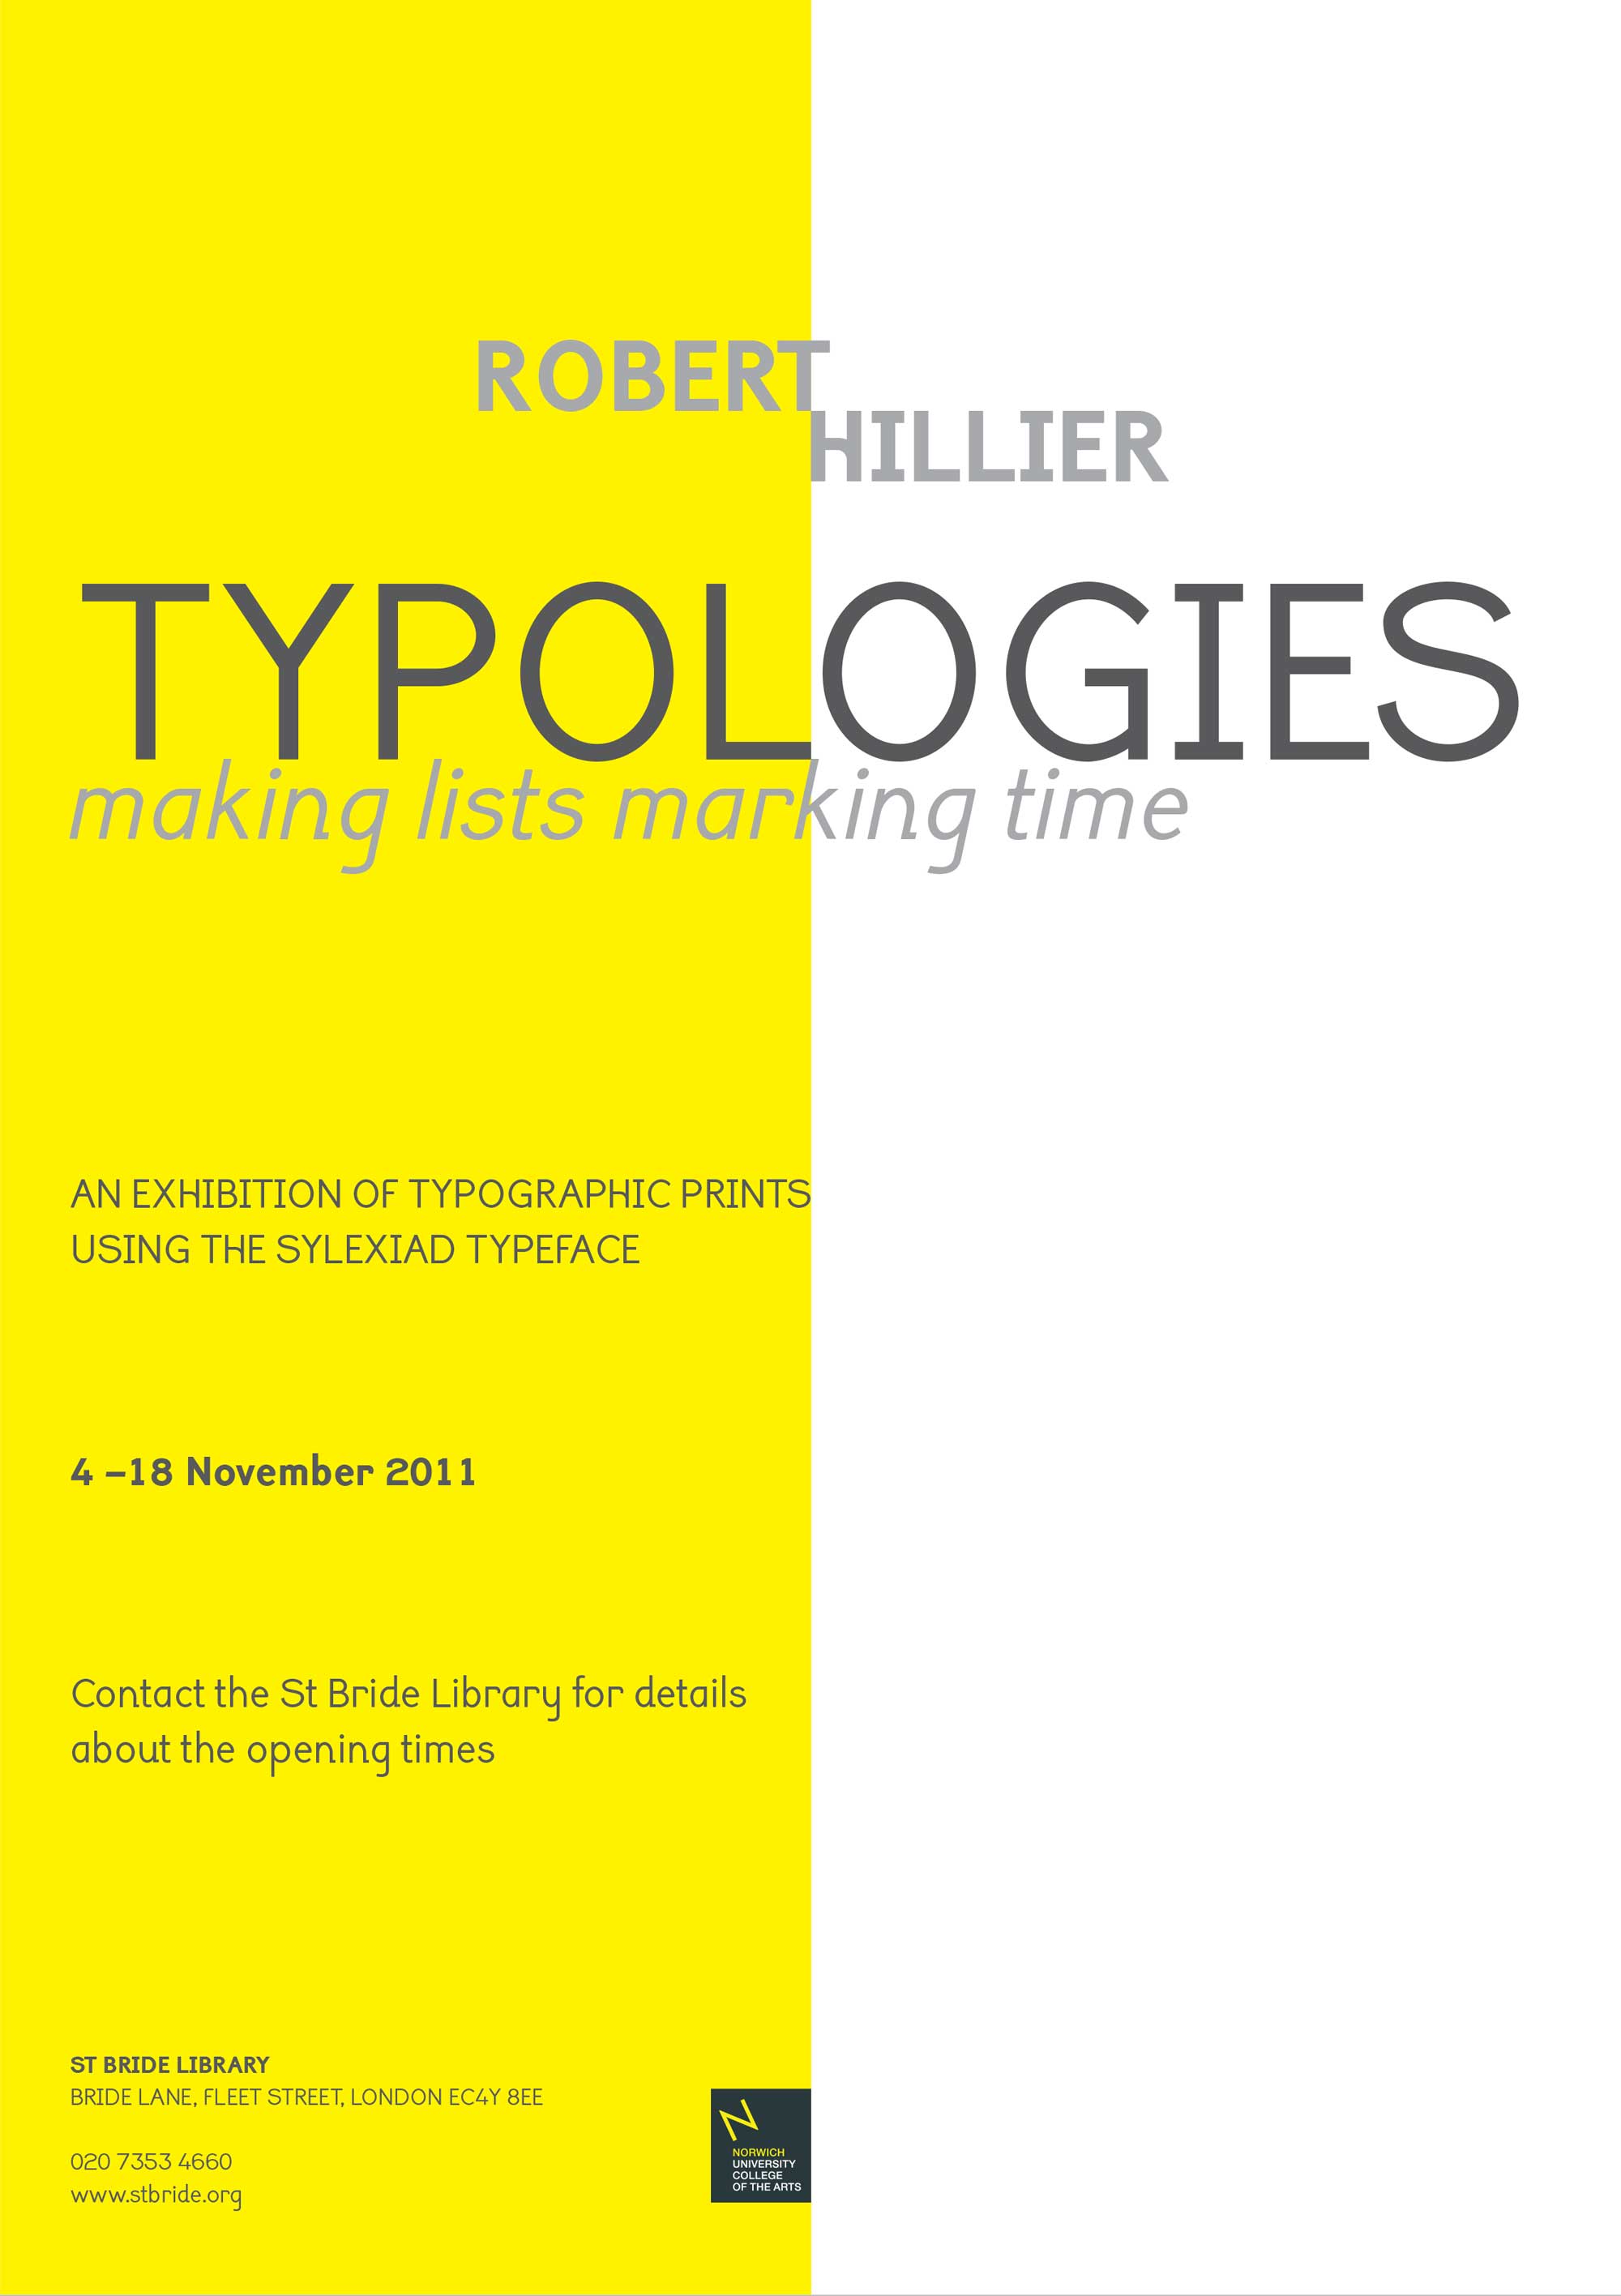 A poster design, shows the portrait page, split down the middle, yellow background on the left and white on the right. The text ‘Typologies’ in large dark grey text at the top